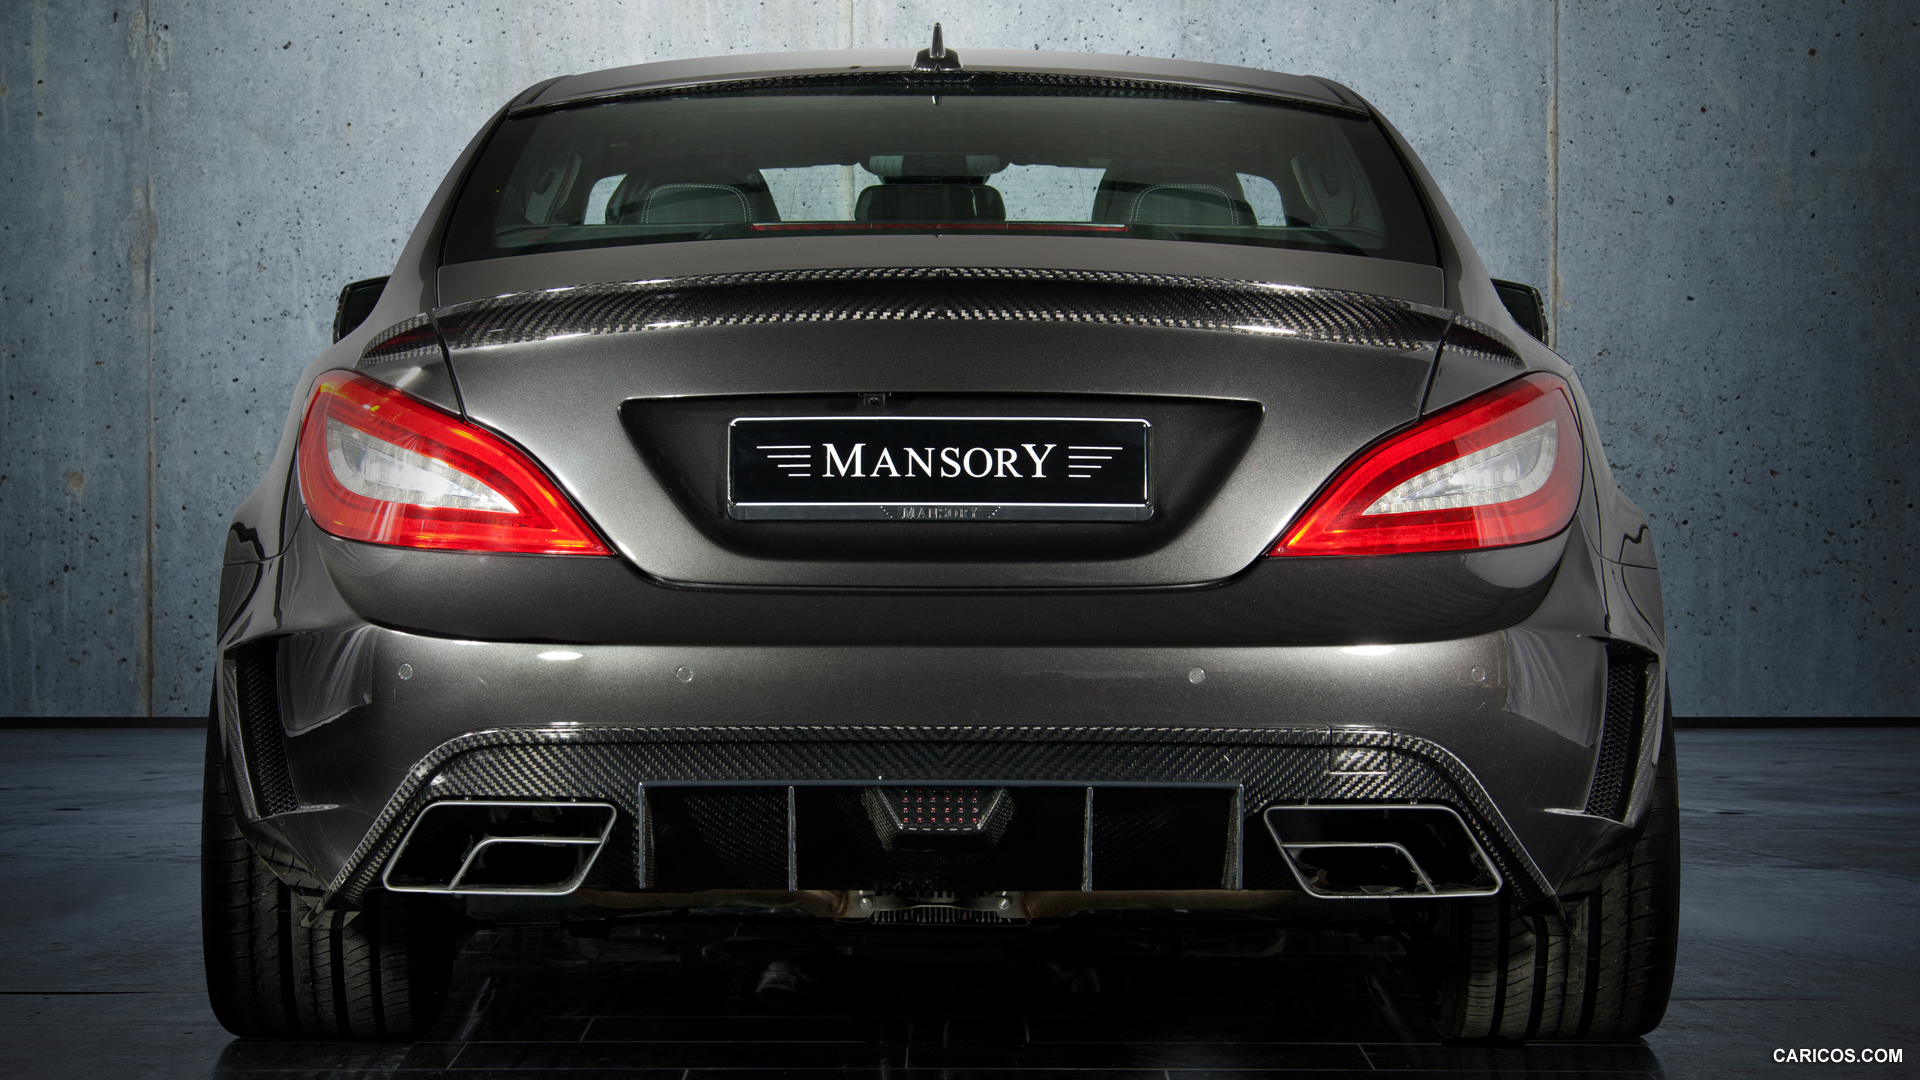 2012 Mansory Mercedes-Benz CLS63 AMG  - Rear, #2 of 5